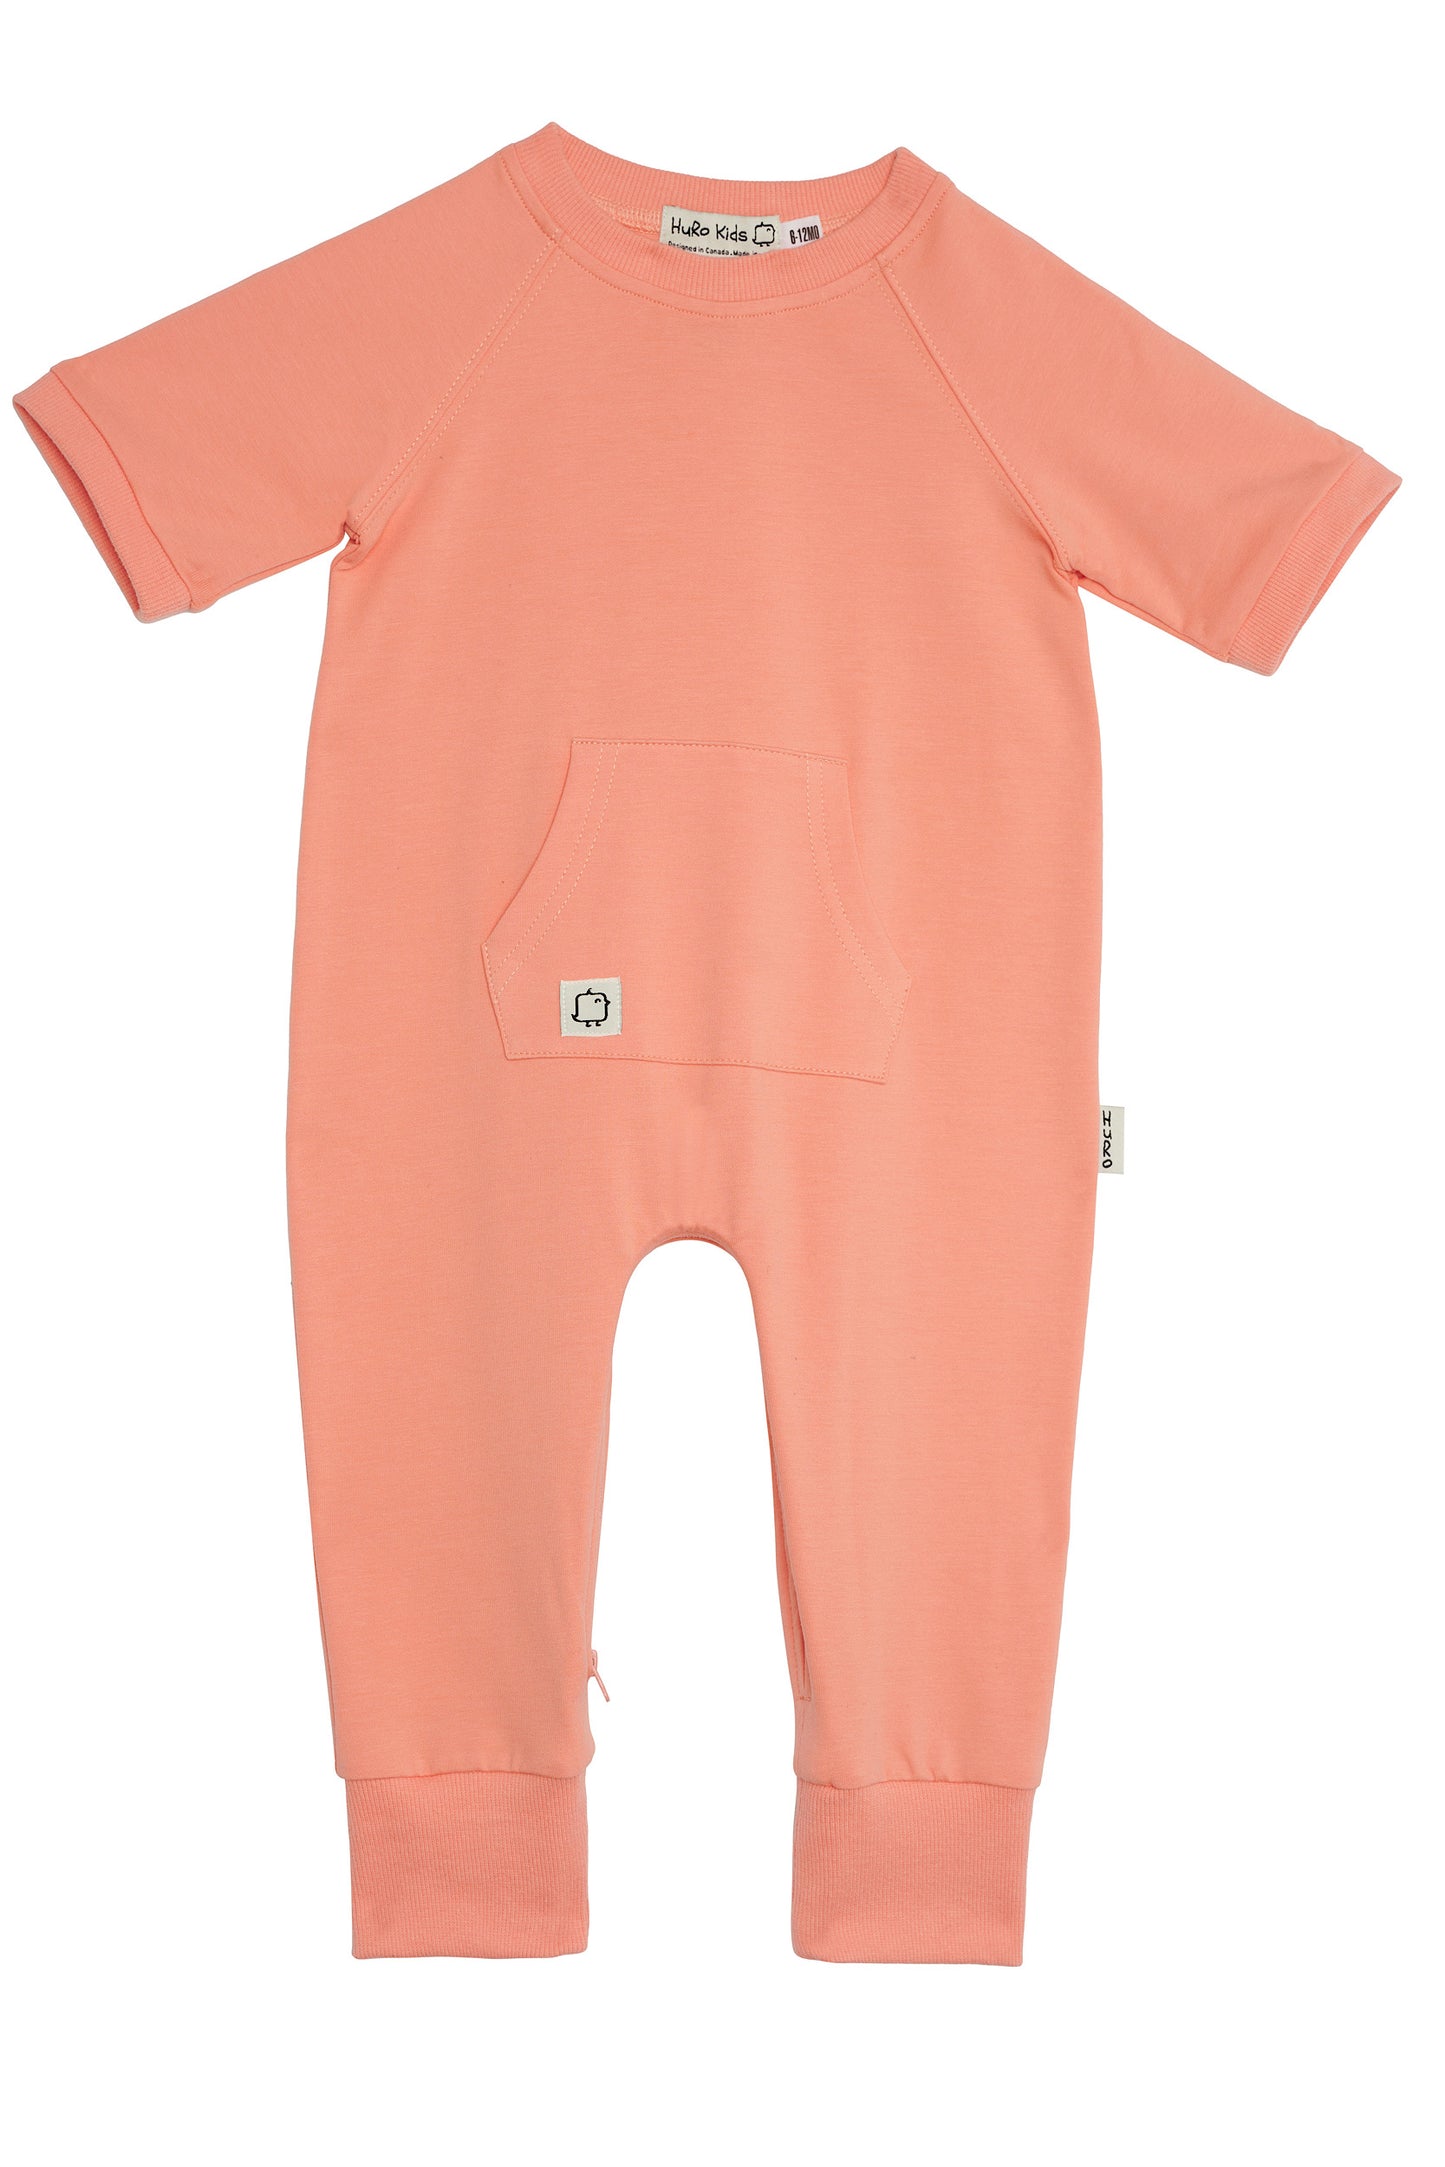 Short Sleeve Romper - Coral (PreOrder/ Ships after April 5th) - HuRo Kids Clothing